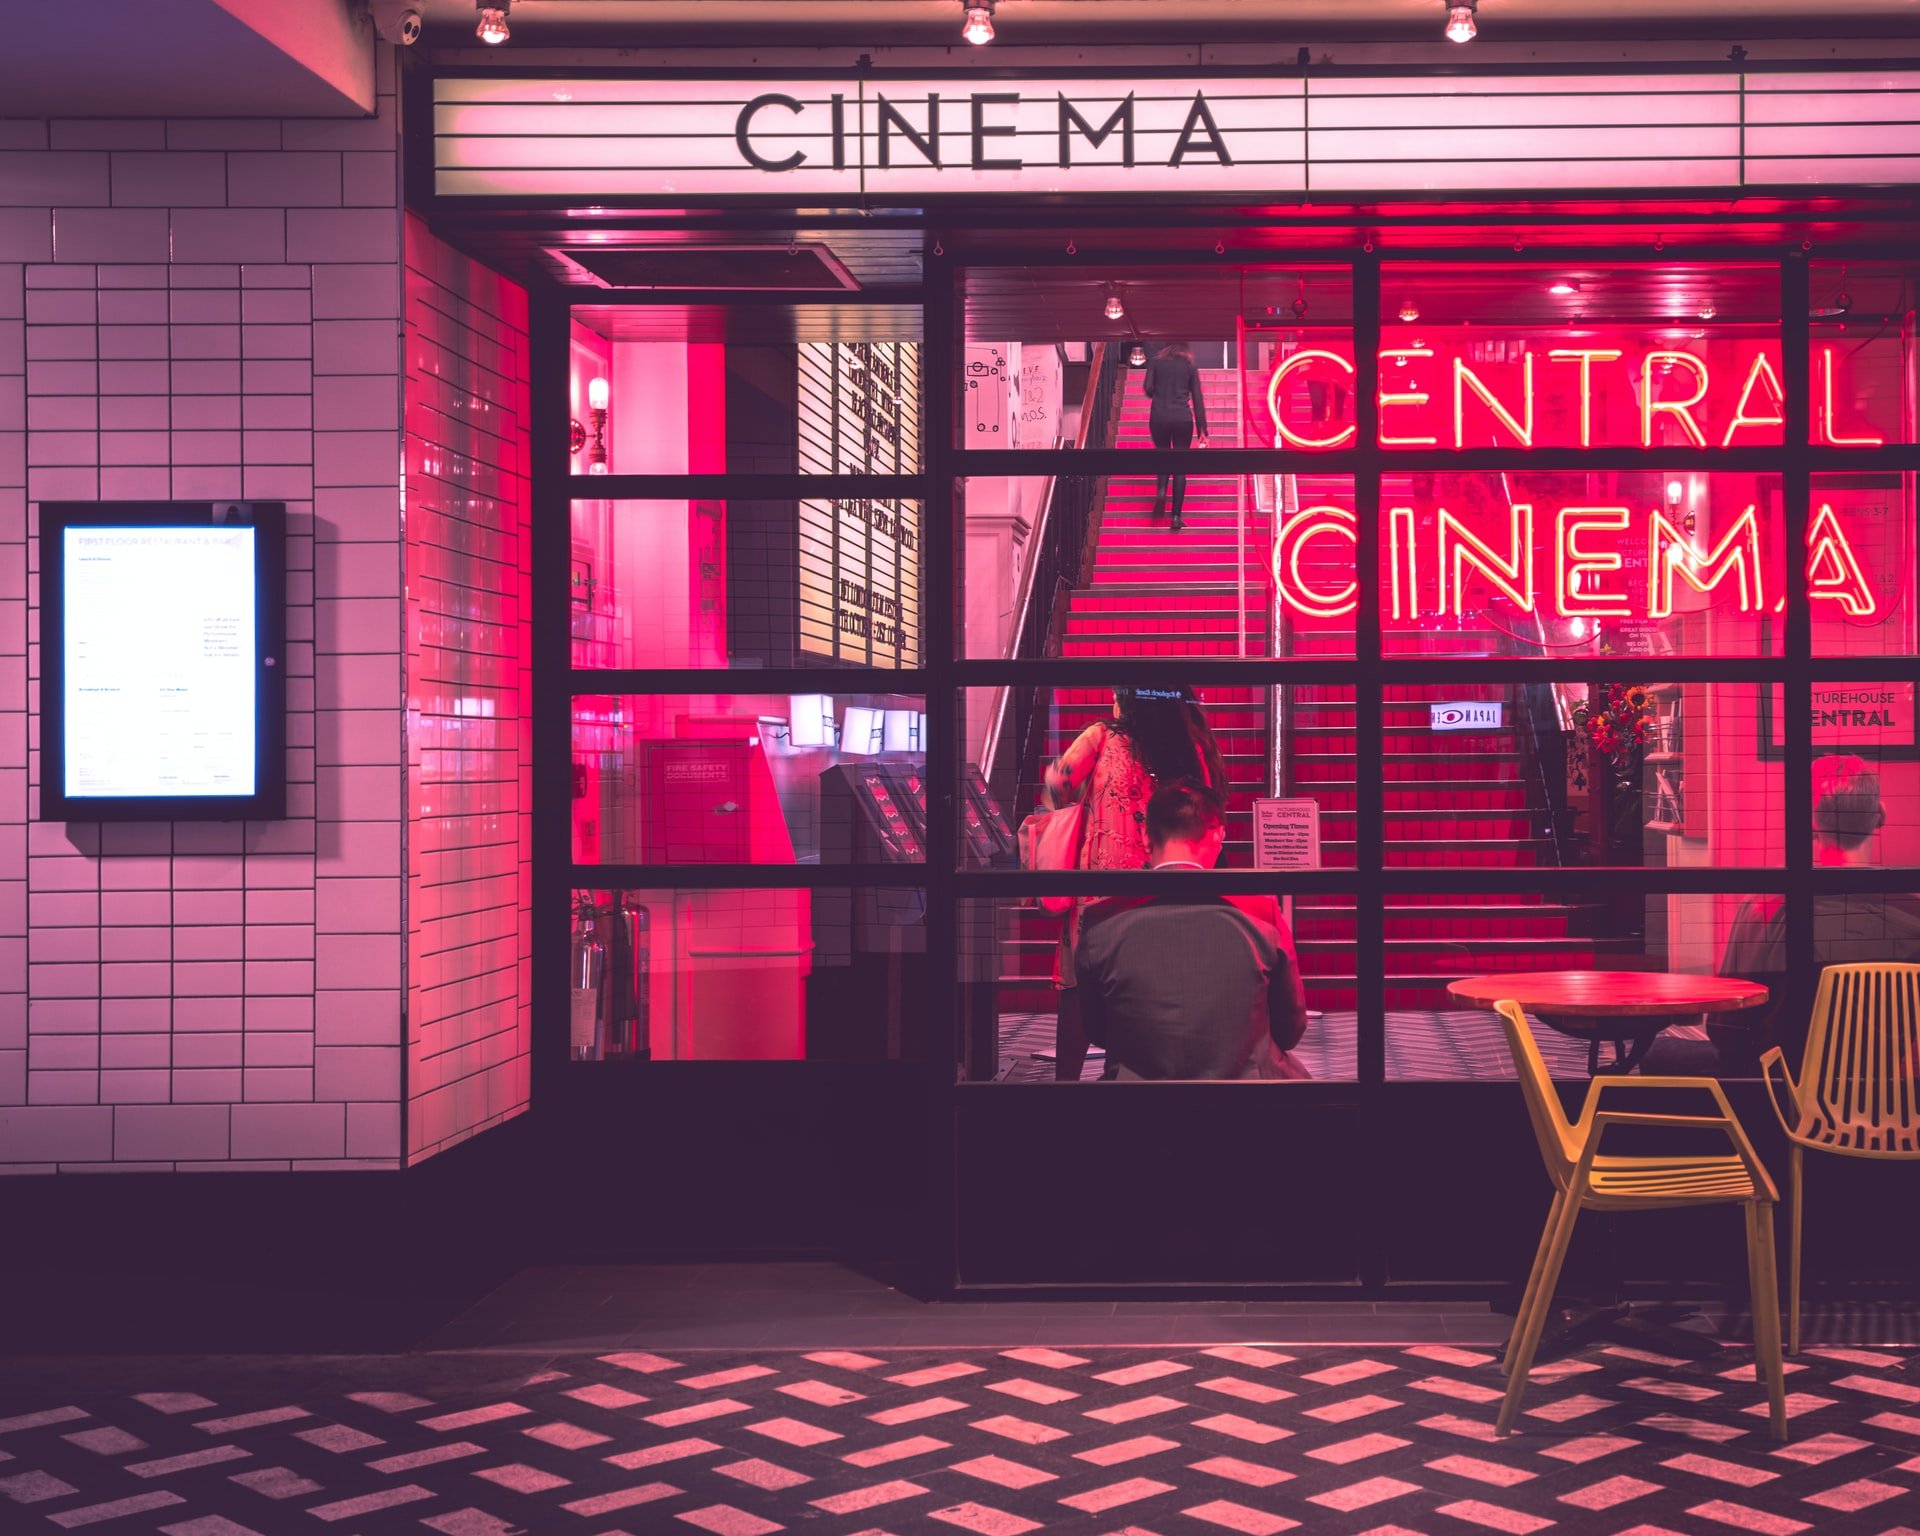 He worked at a local cinema. | Source: Unsplash